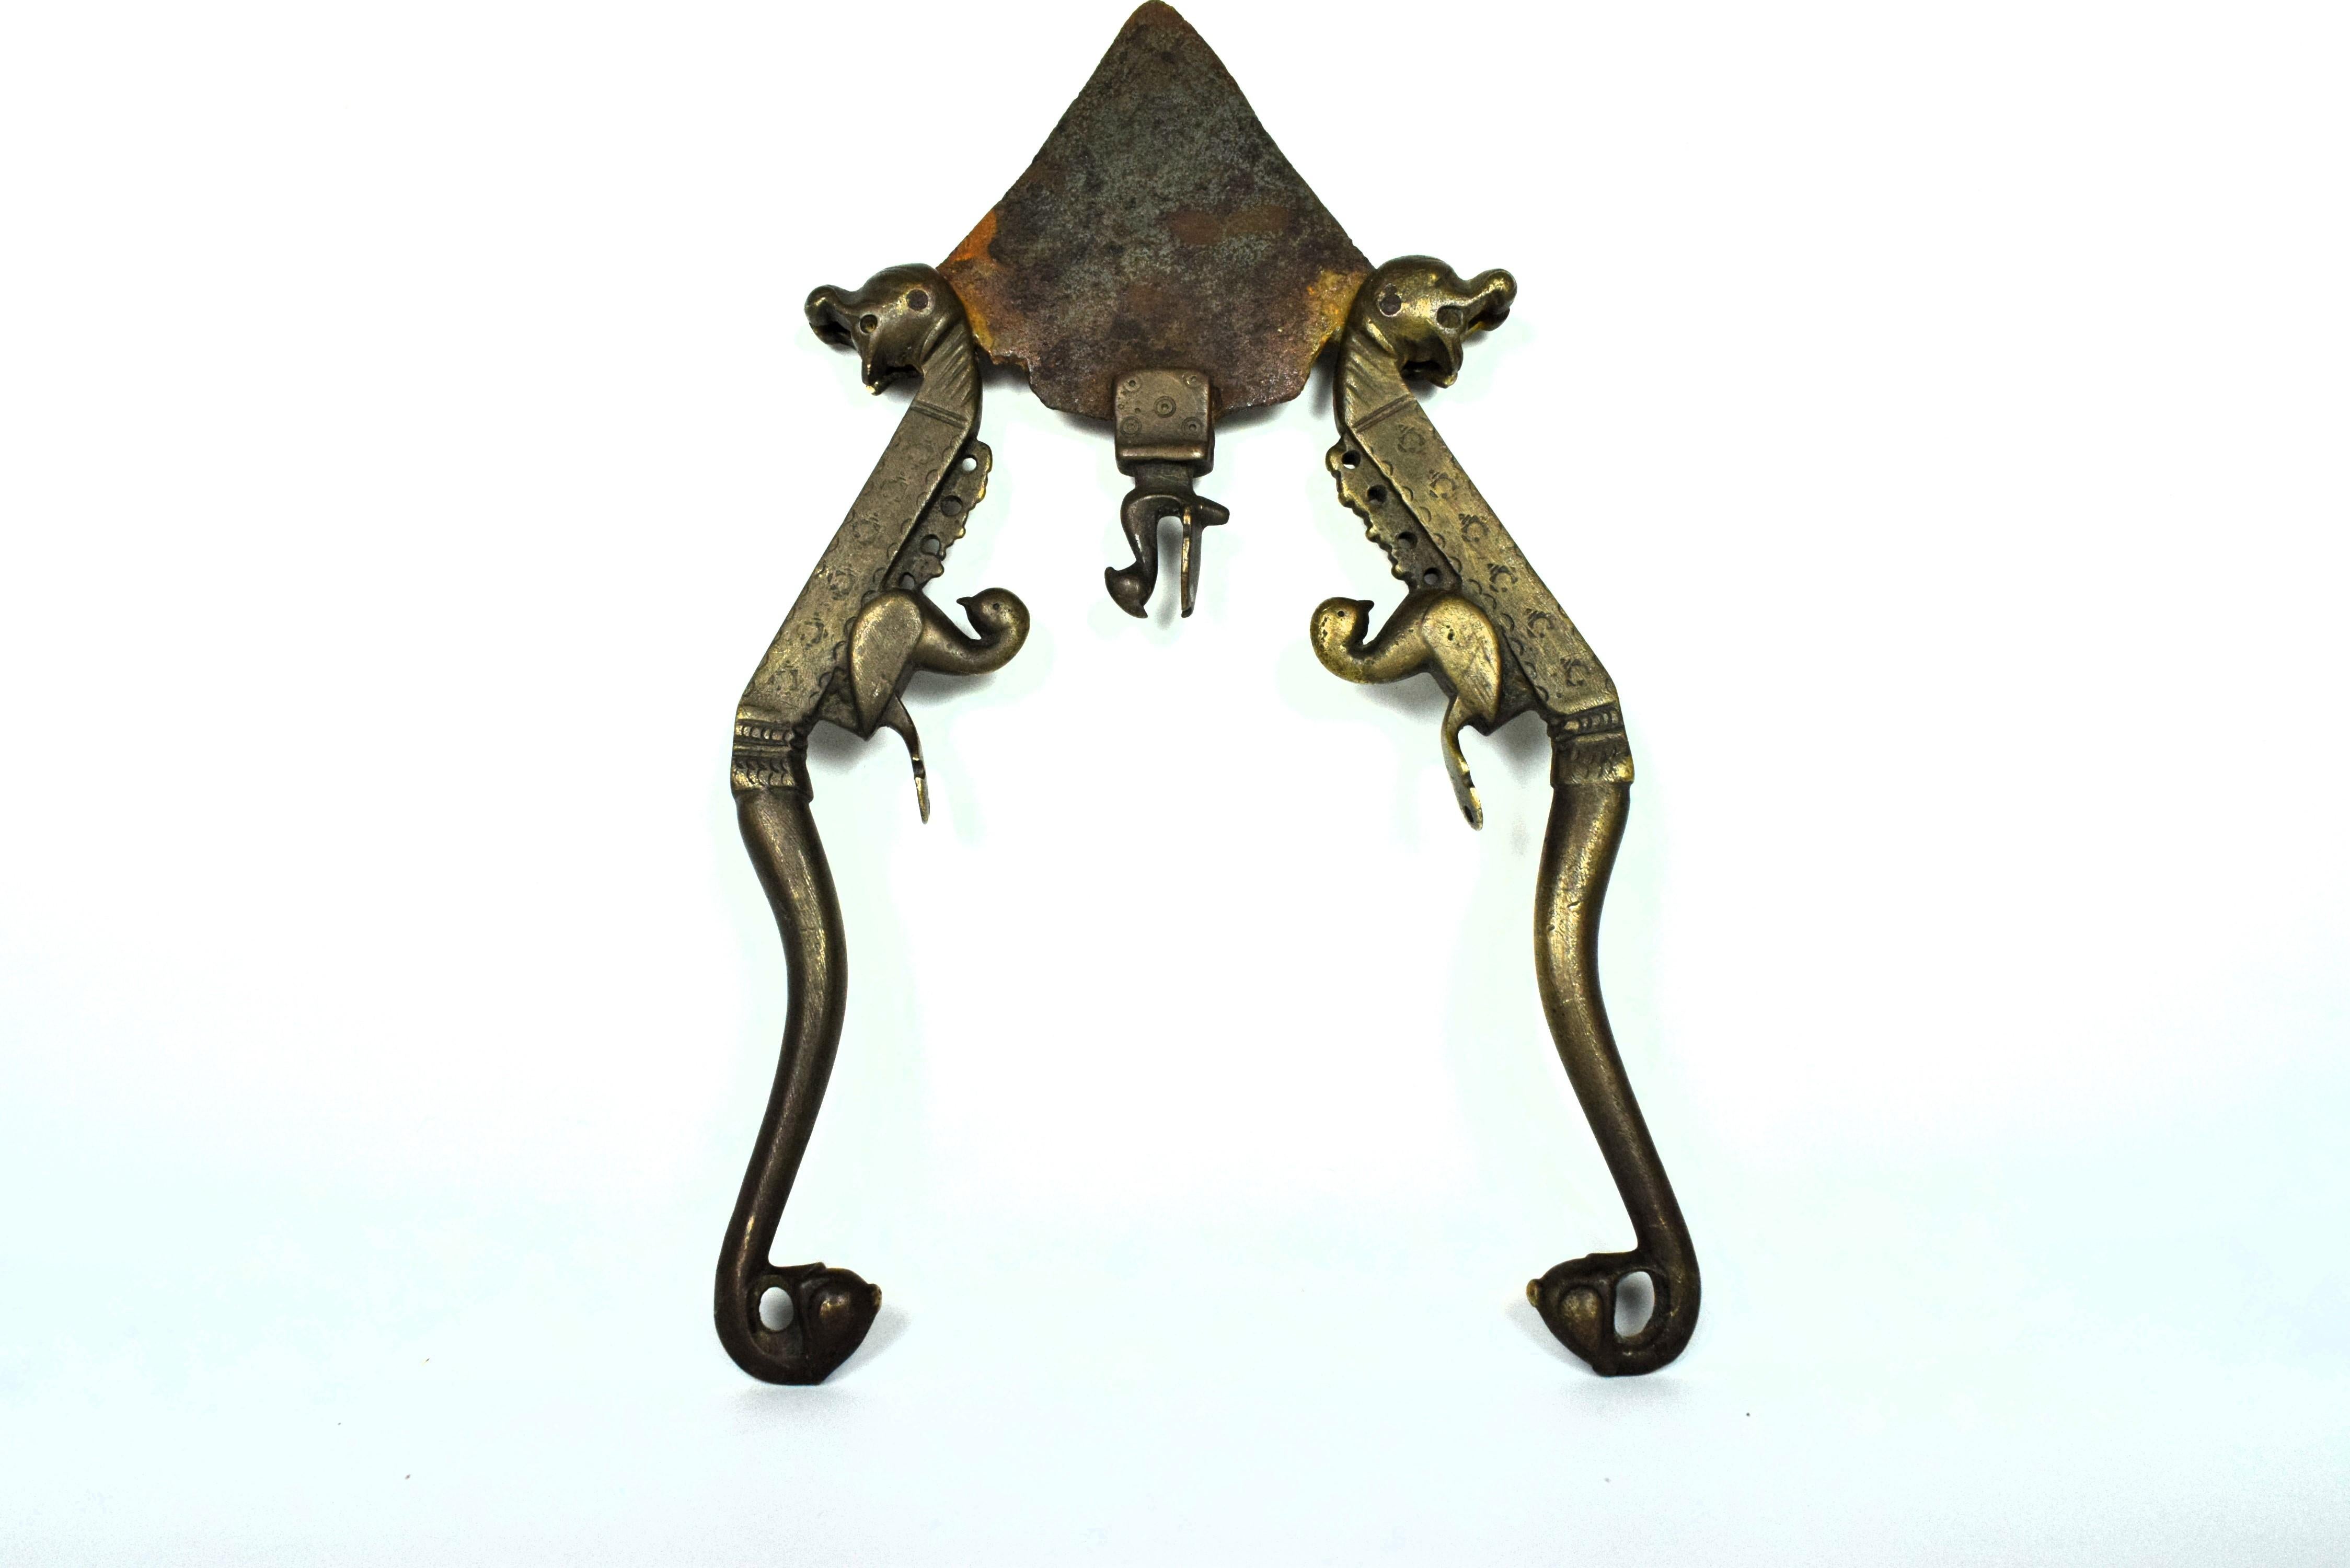 A 19th-century Mughal brass betel nut cutter, also known as a 